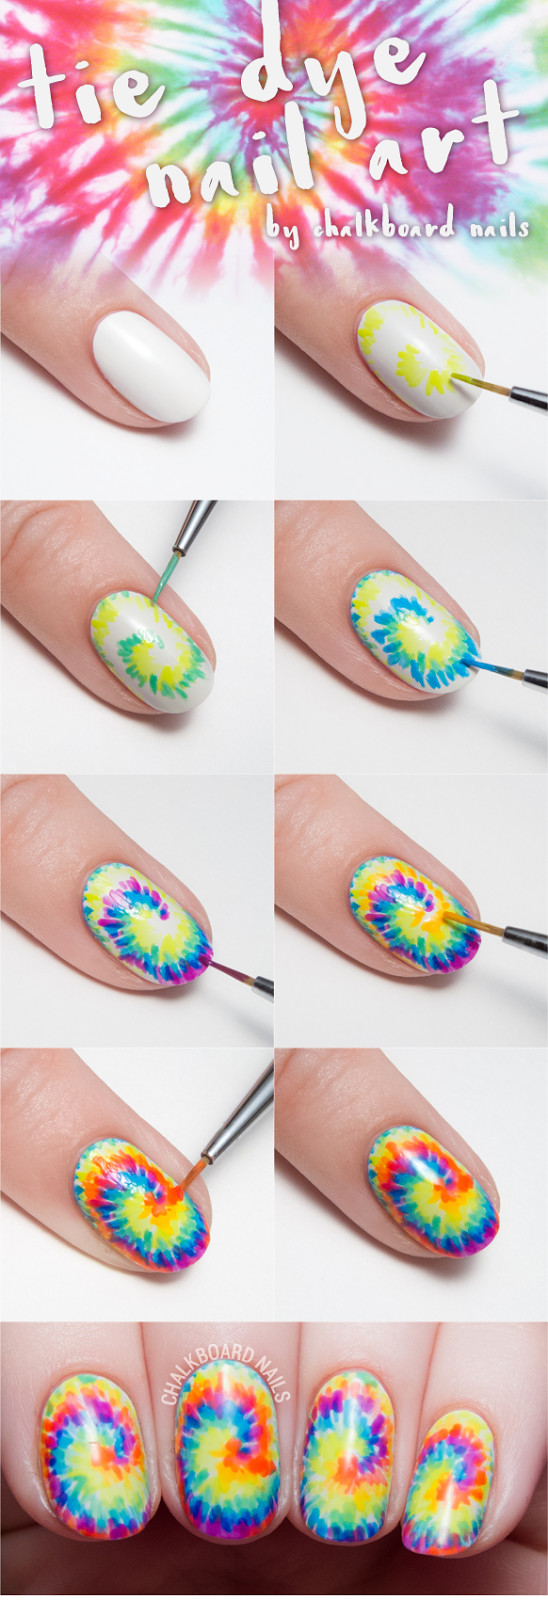 Tie Dye Nail Art
 Tie dye your tips with this nail art tutorial and sneak